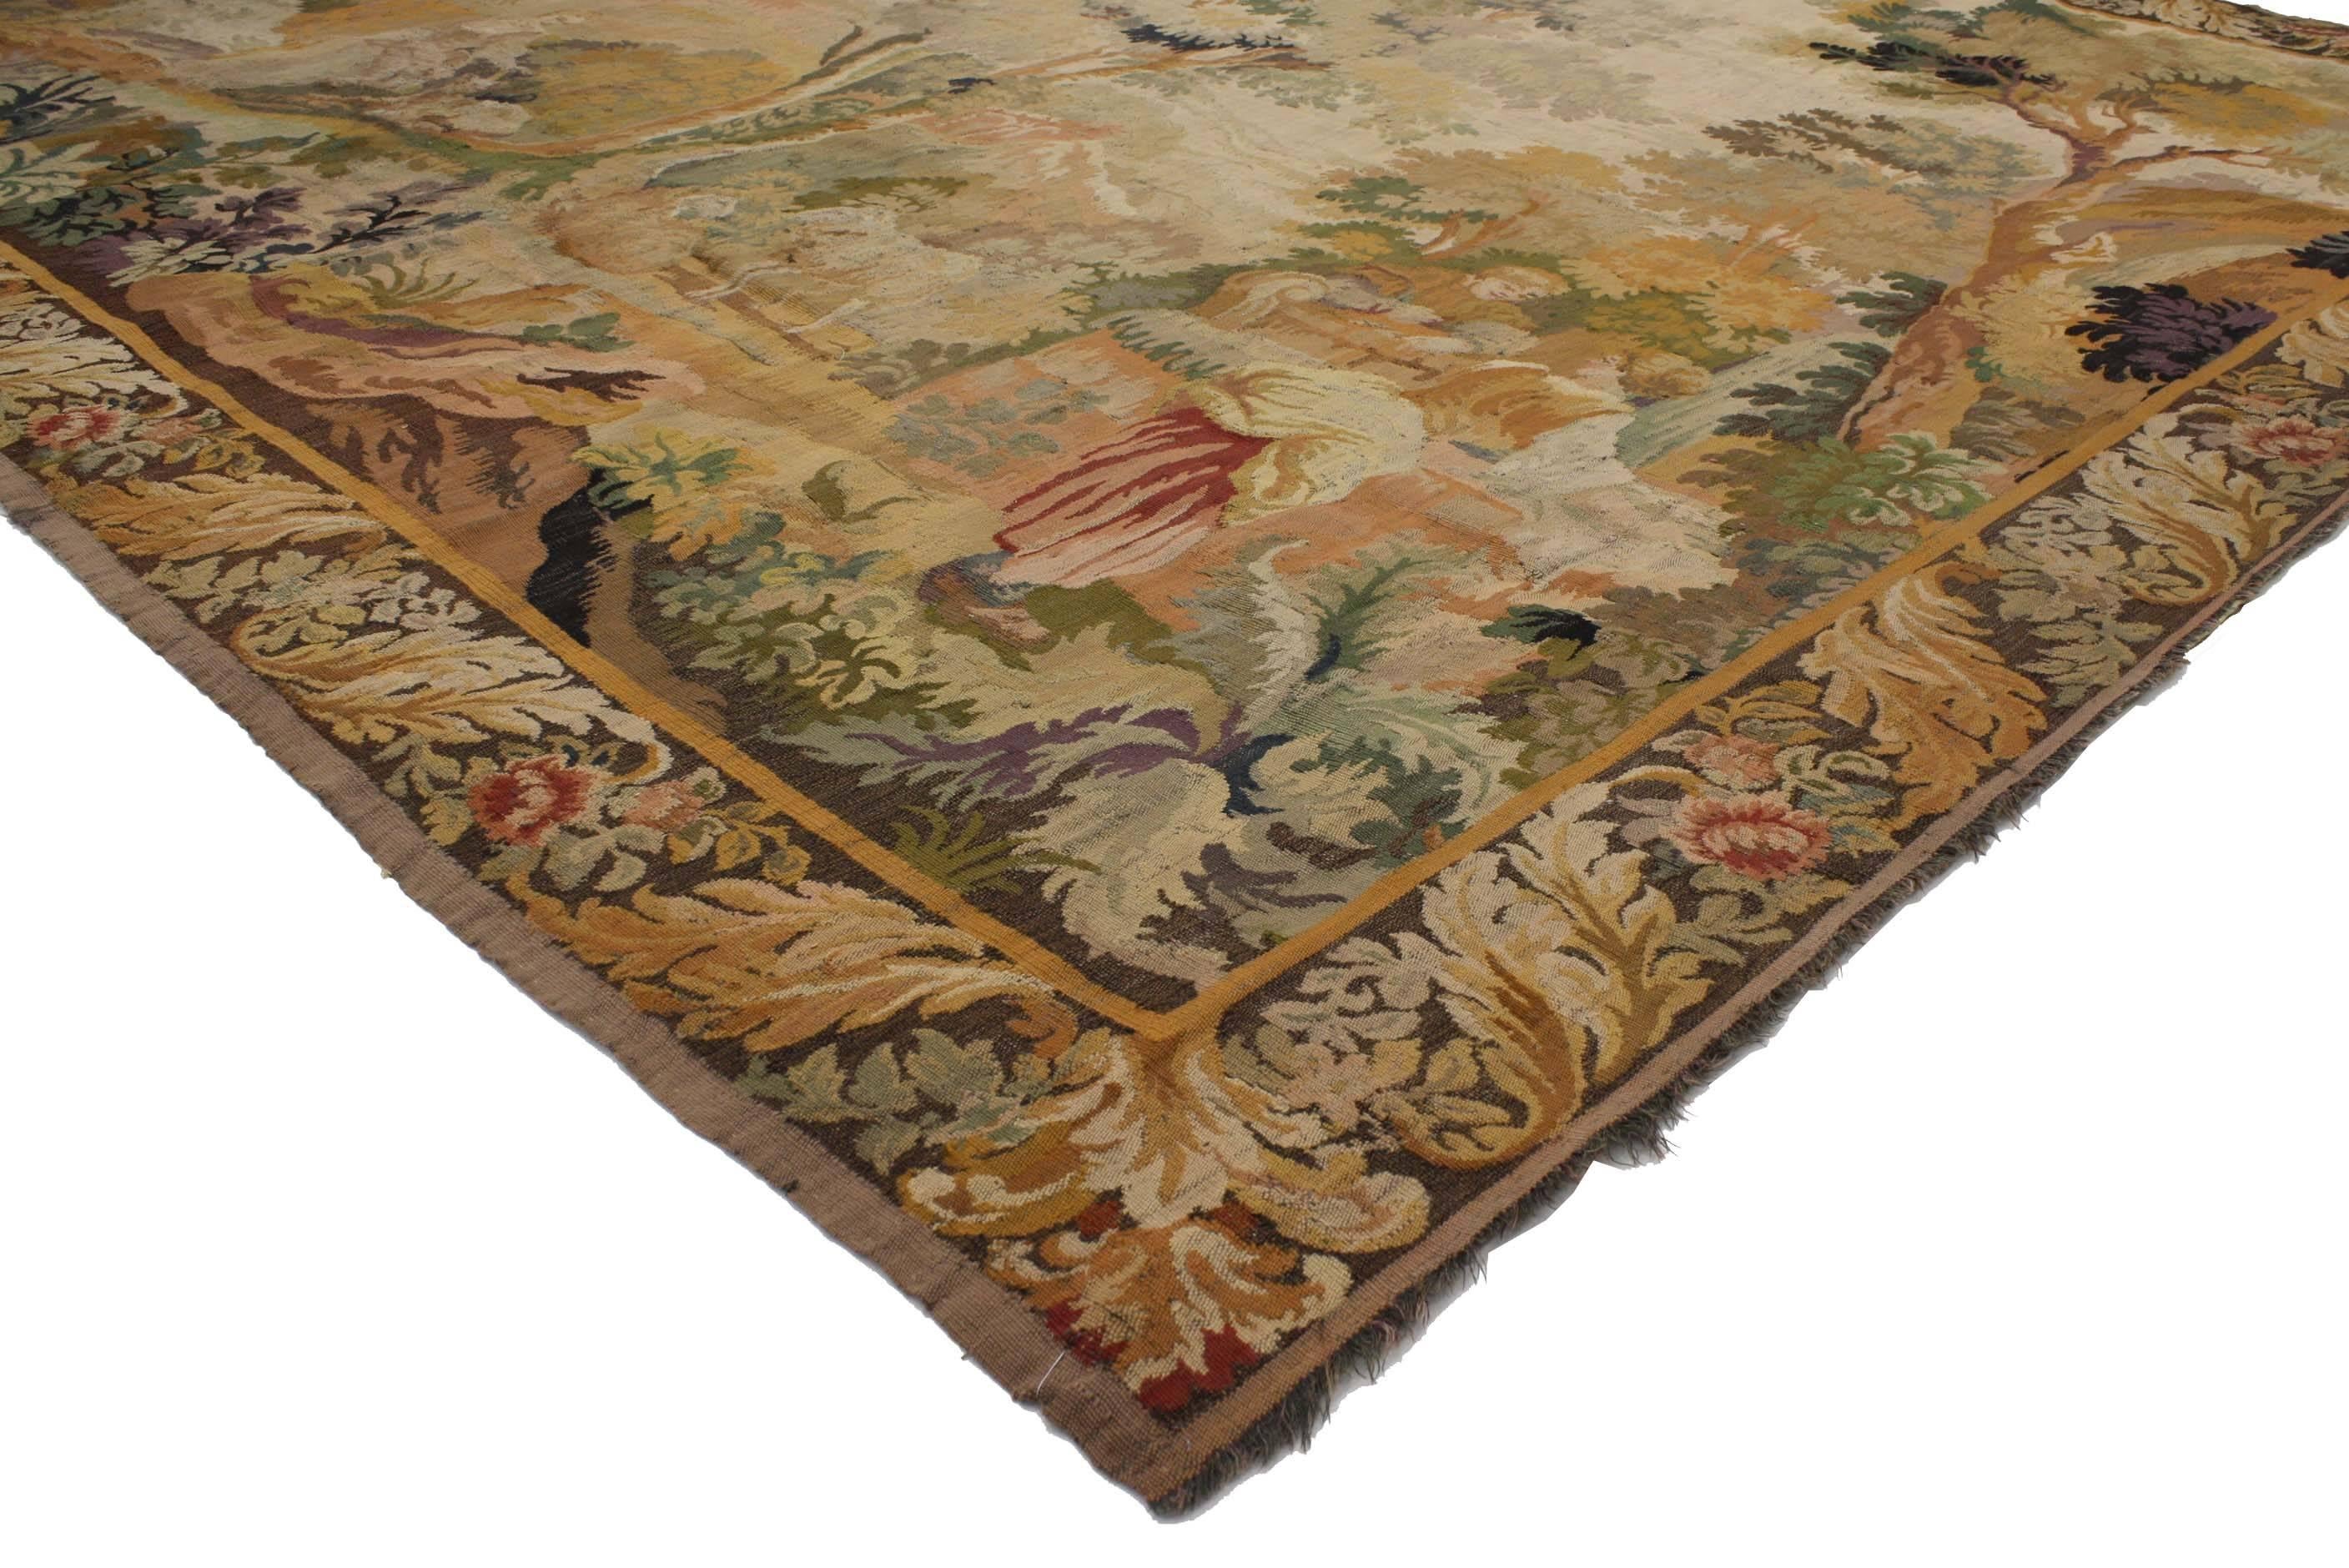 76930 Late 19th Century Antique French Rococo Noble Pastoral Style Tapestry Inspired by Francois Boucher, Landscape Scene Verdure Wall Hanging. Drawing inspiration from Louis XV style and Francois Boucher Noble Pastorale Series, this handwoven wool